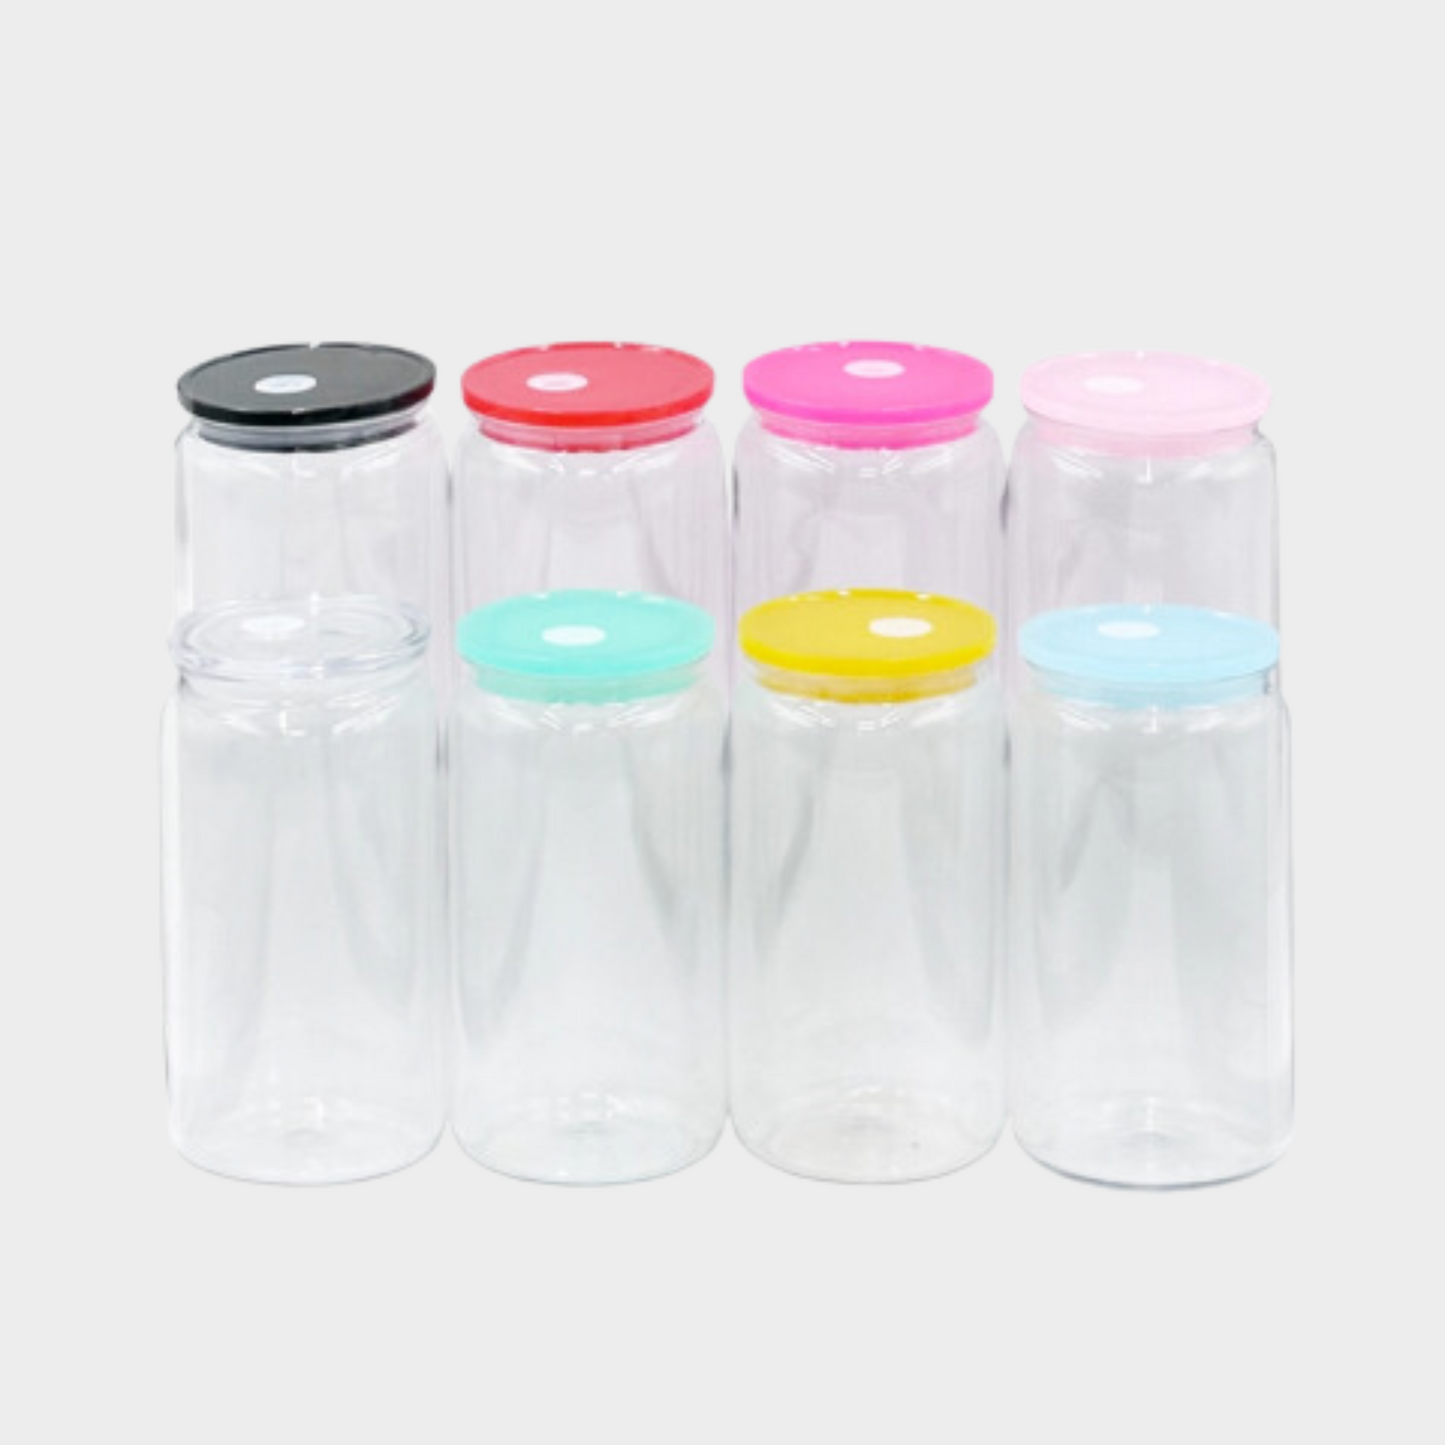 NEW 16 oz Clear Plastic Tumbler Cup with COLORED LID